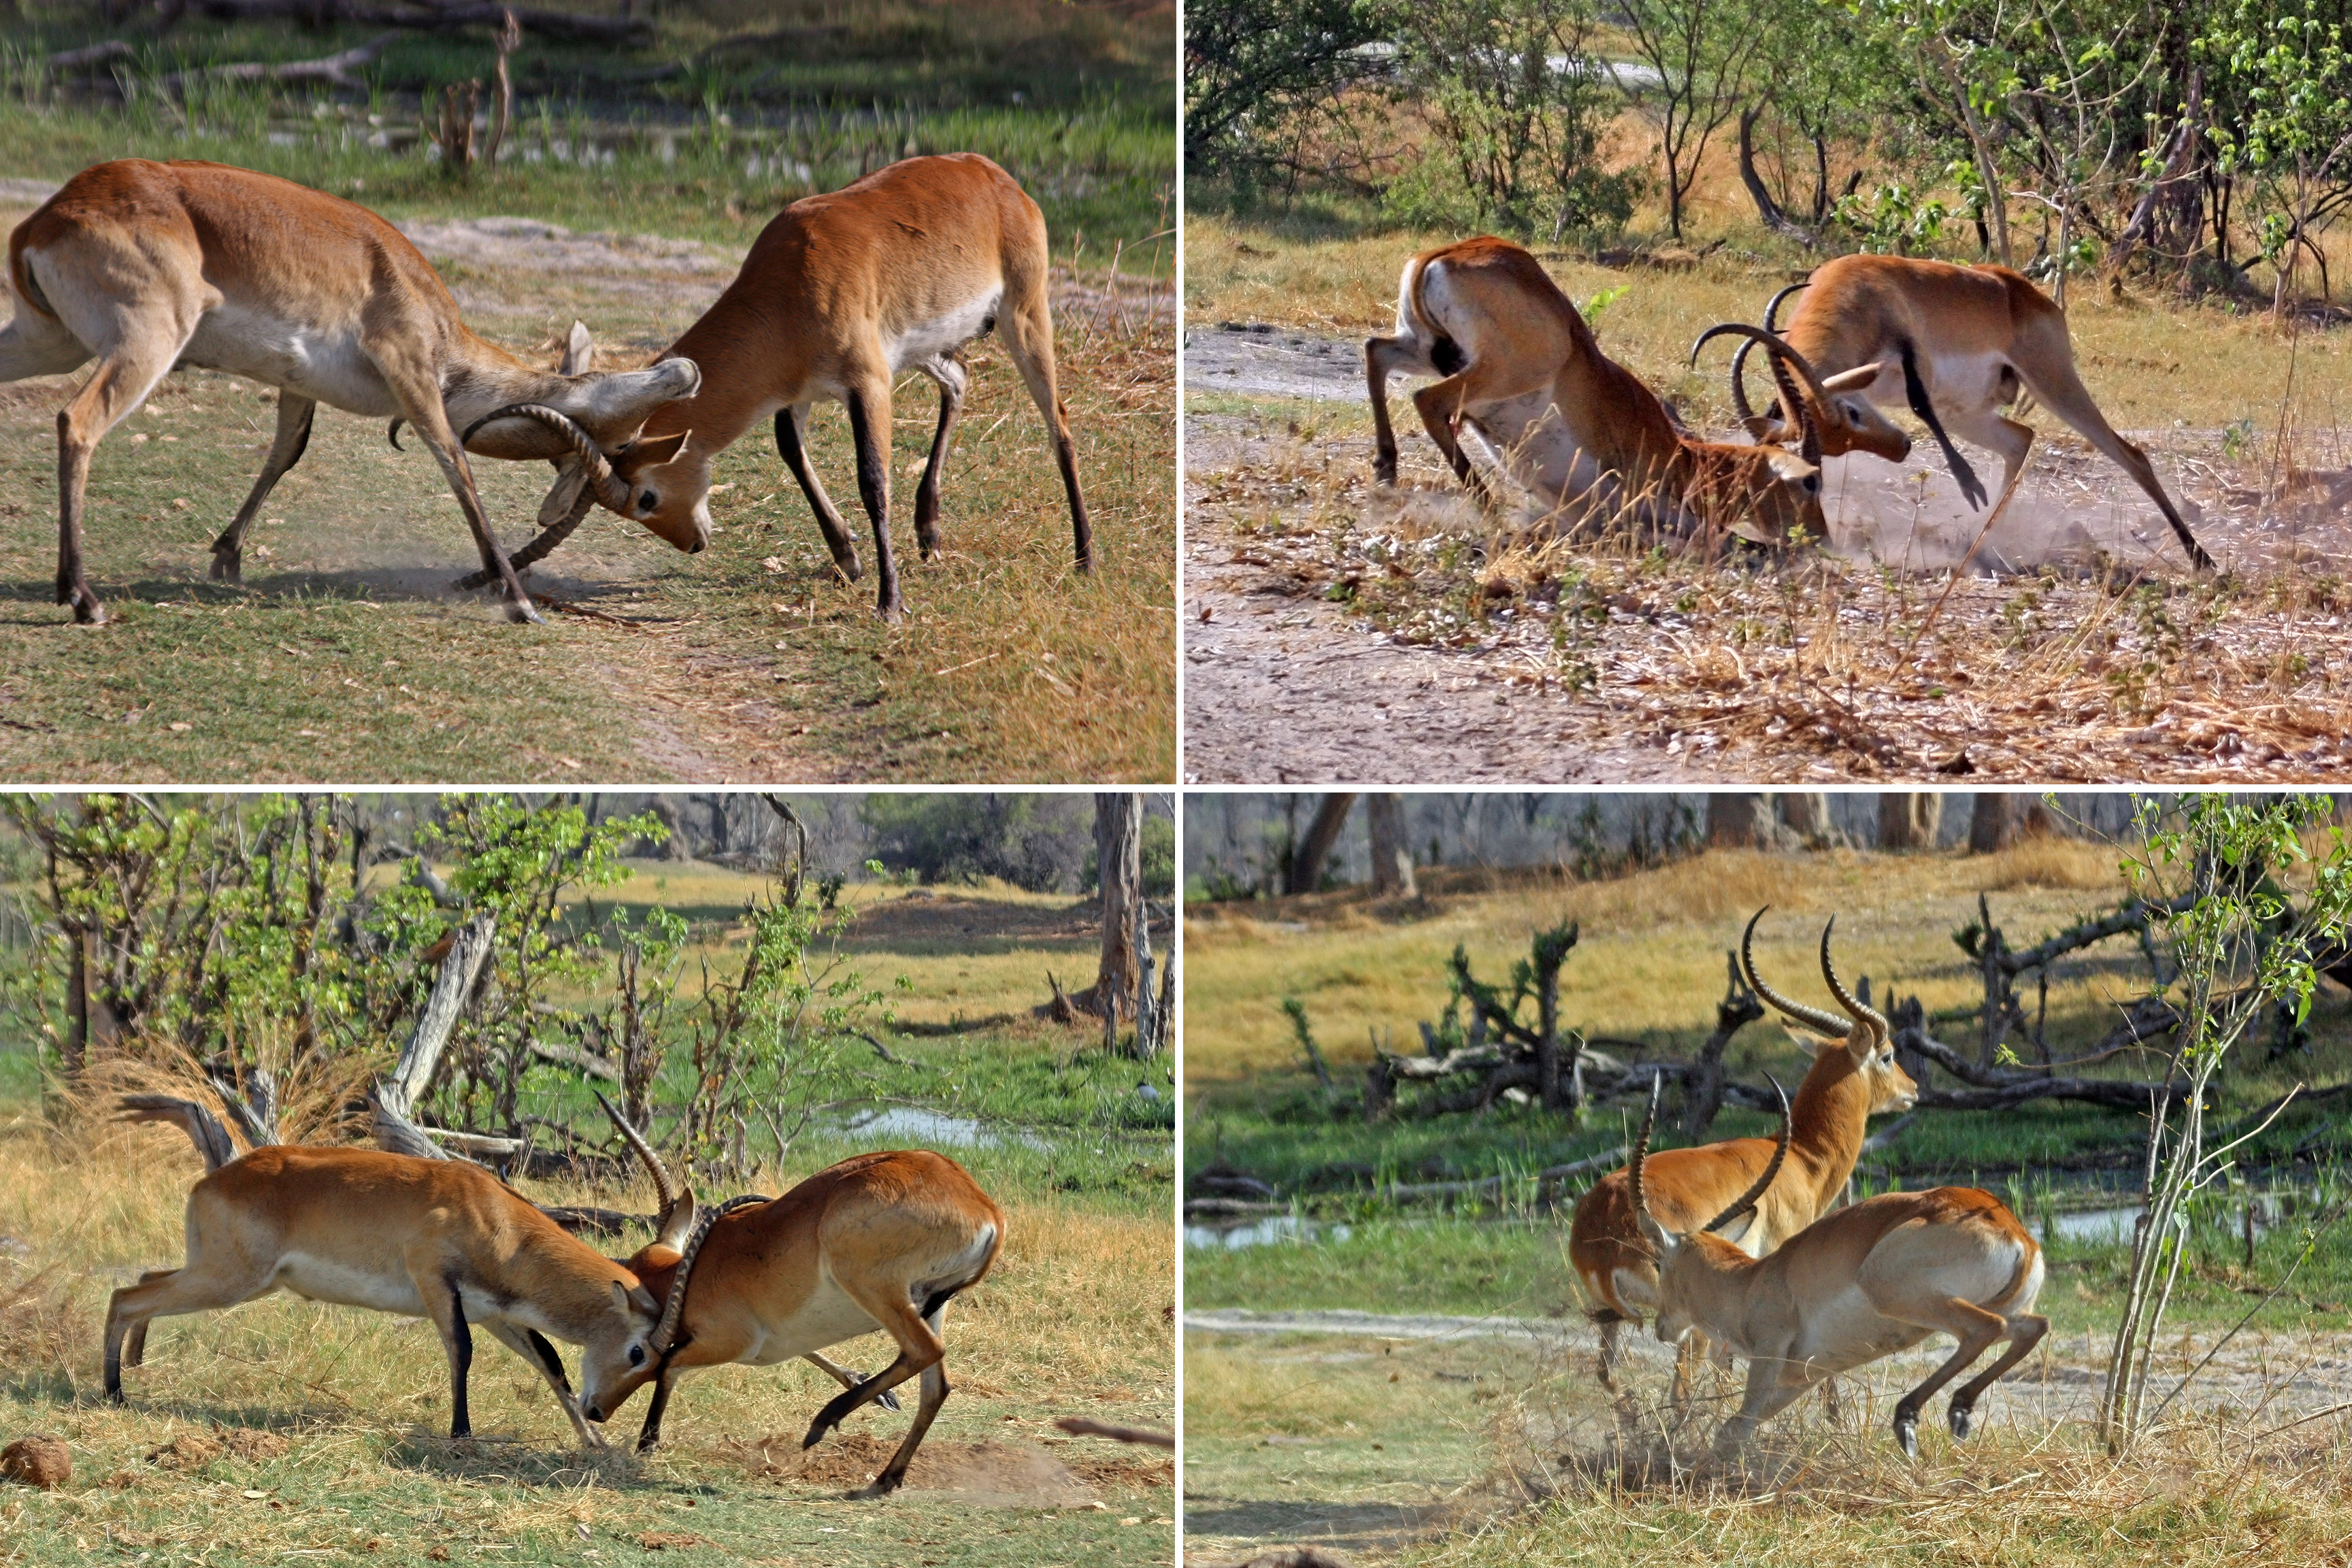 Red lechwe (Kobus leche leche) males fighting, composite